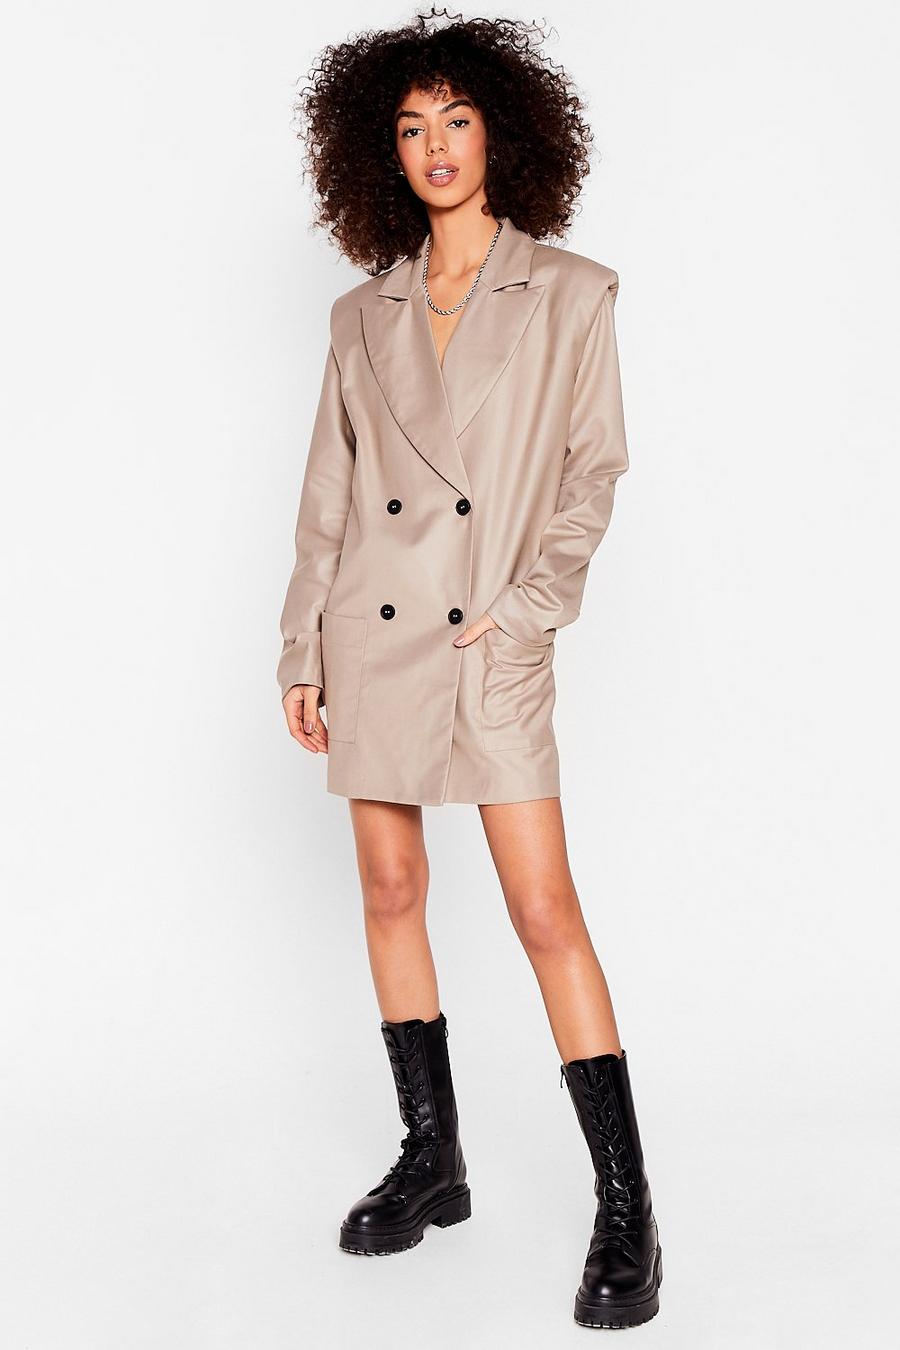 Taupe beige Relaxed Shoulder Pad Blazer Dress